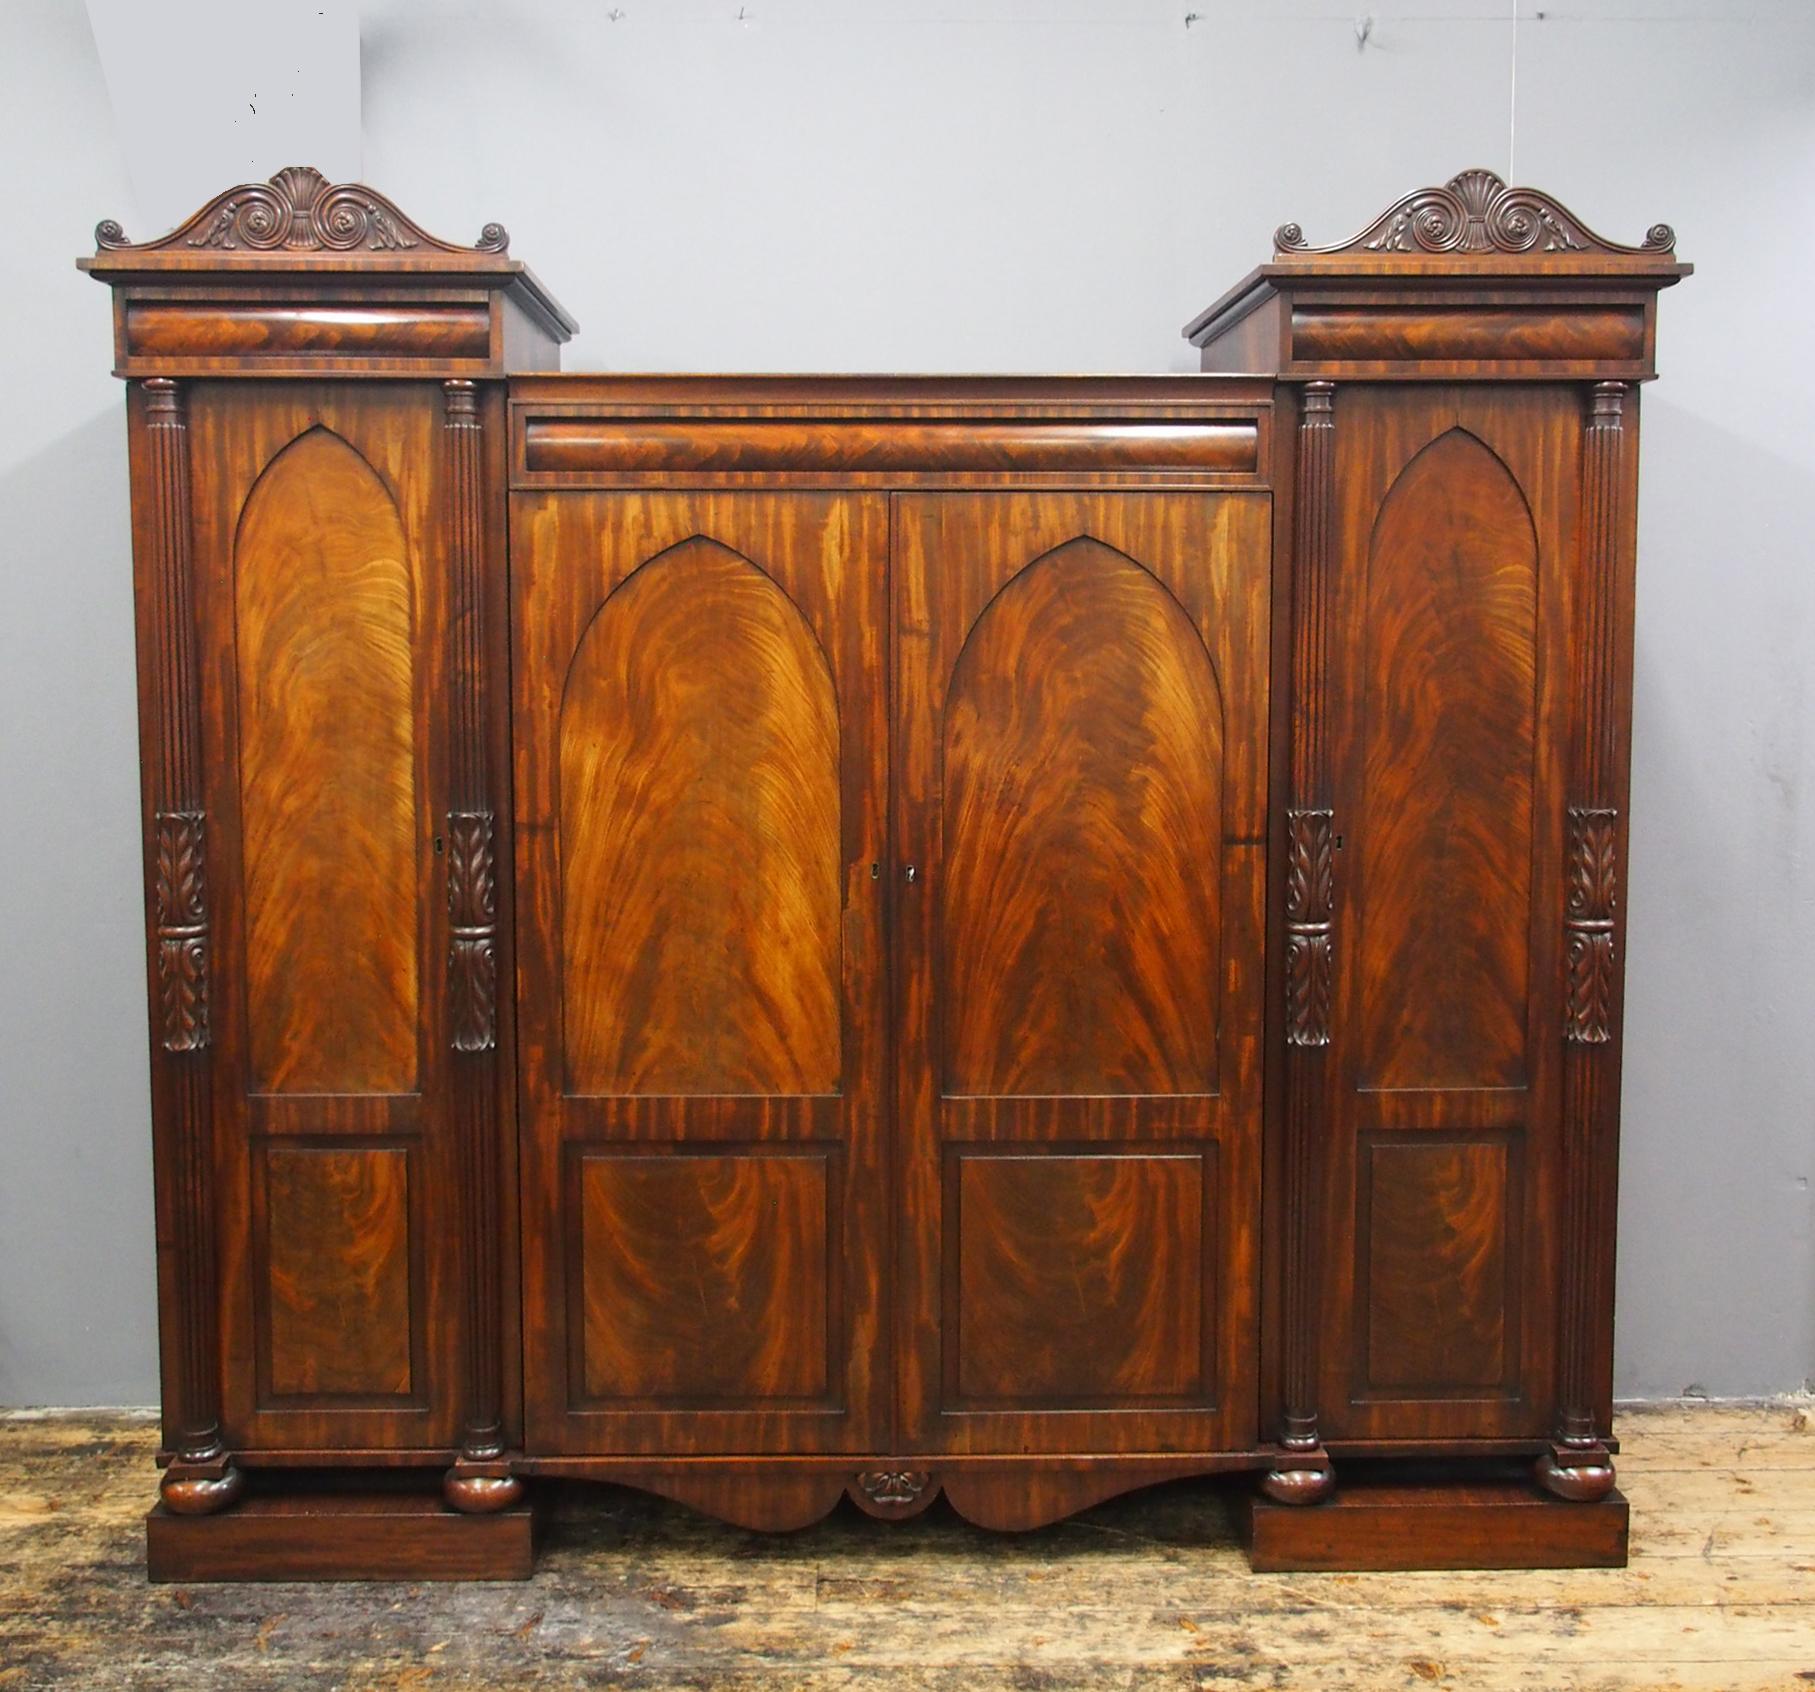 William IV Scottish mahogany 4-door wardrobe, circa 1830. With a cushion molded cornice and foliate carved pediments leading on to raised sides, it has Gothic arched panel doors in flame mahogany. These are flanked by fluted and acanthus carved